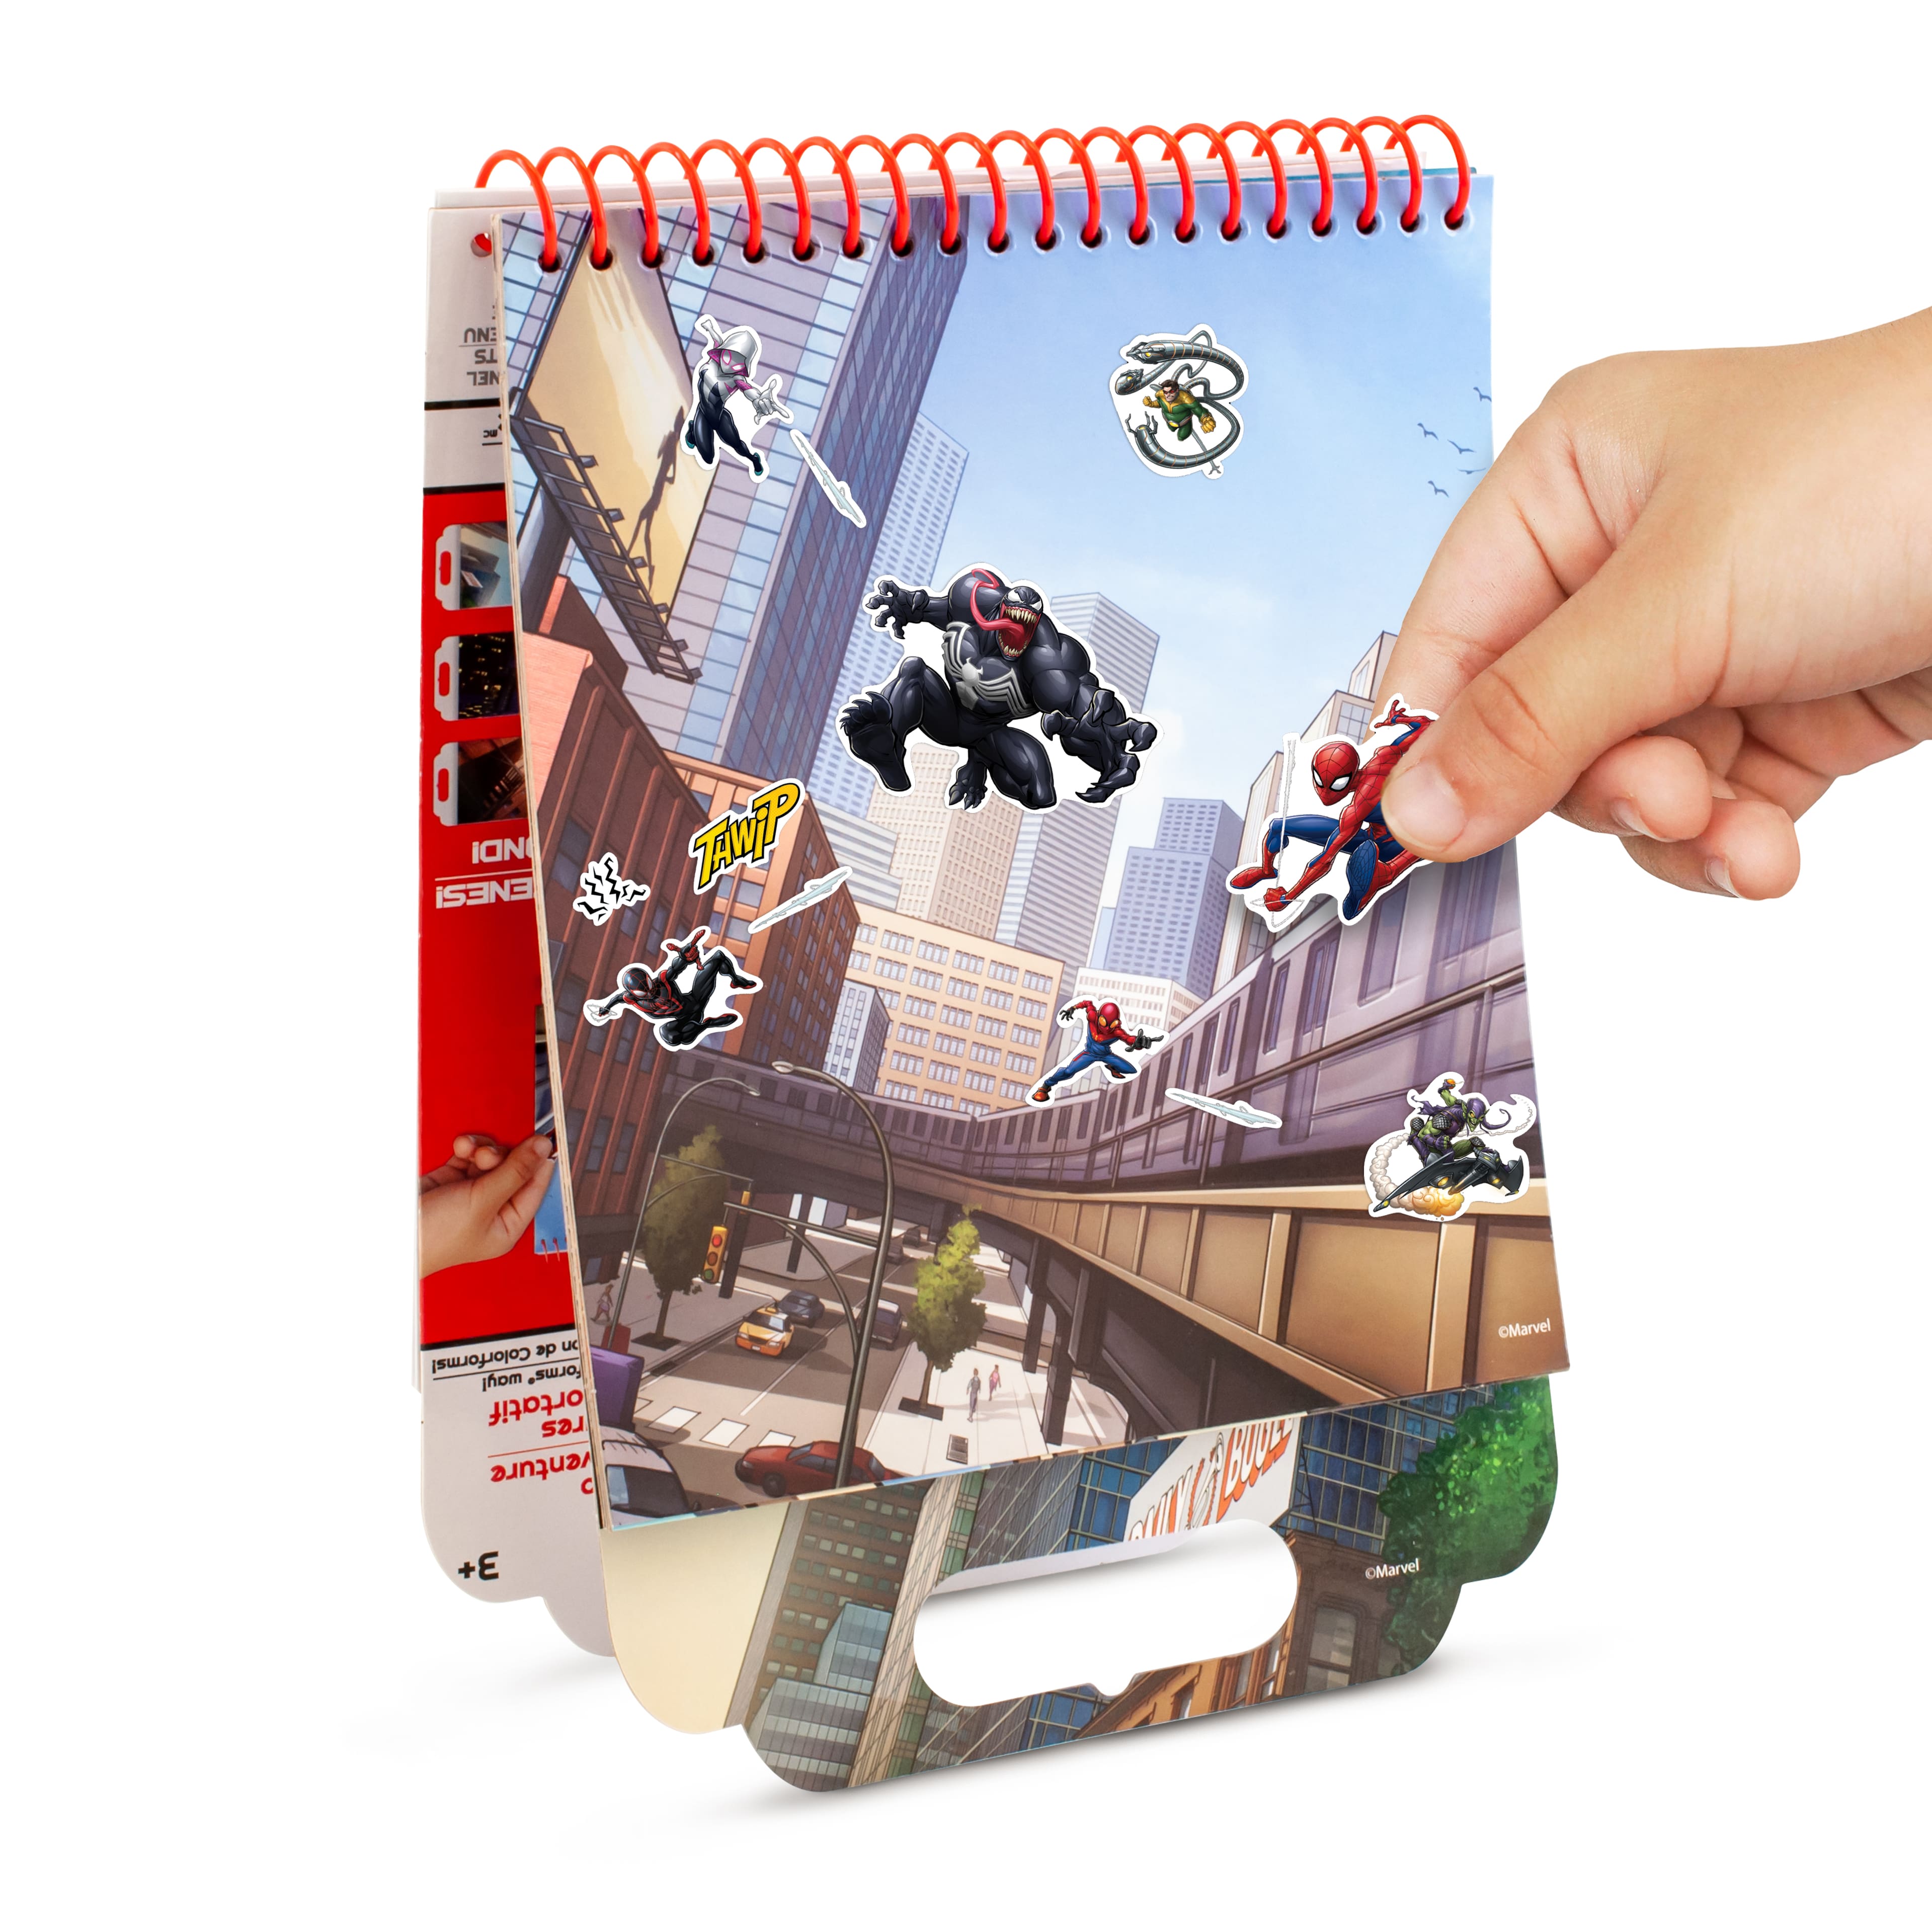 Colorforms&#xAE; Spider-Man On-The-Go Sticker Story Adventure